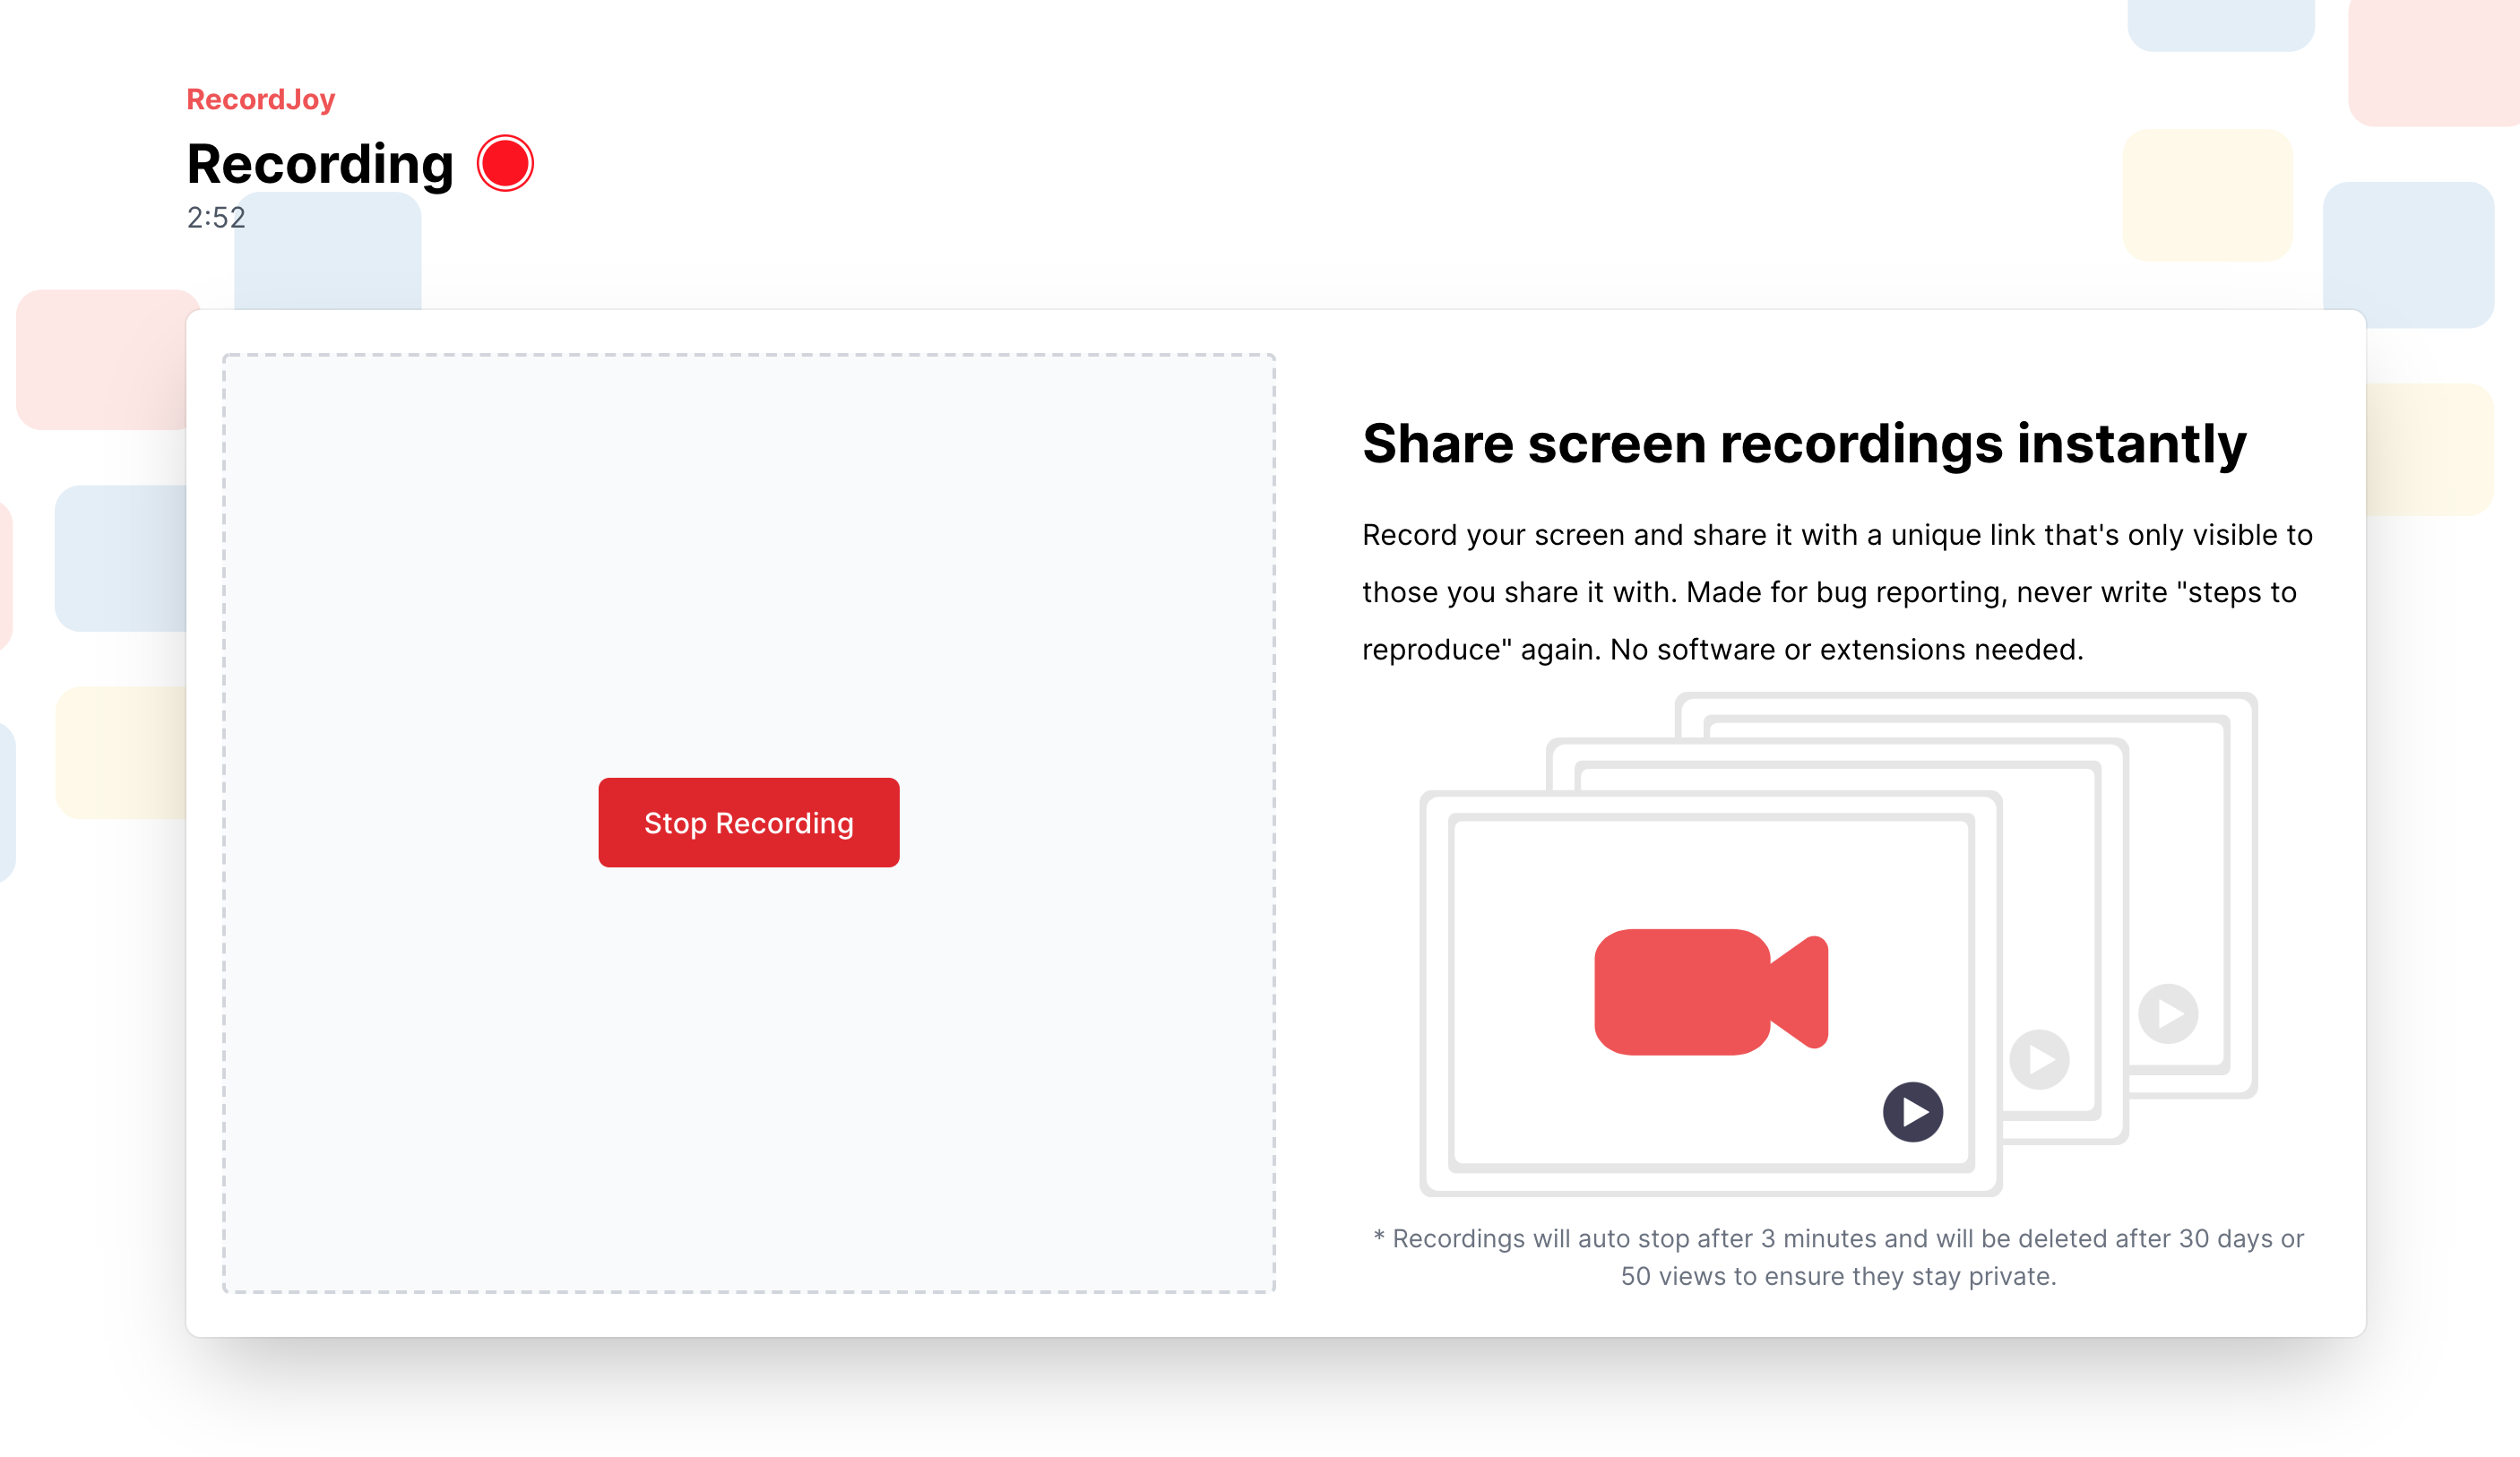 Get feedback from a vast remote working audience about RecordJoy